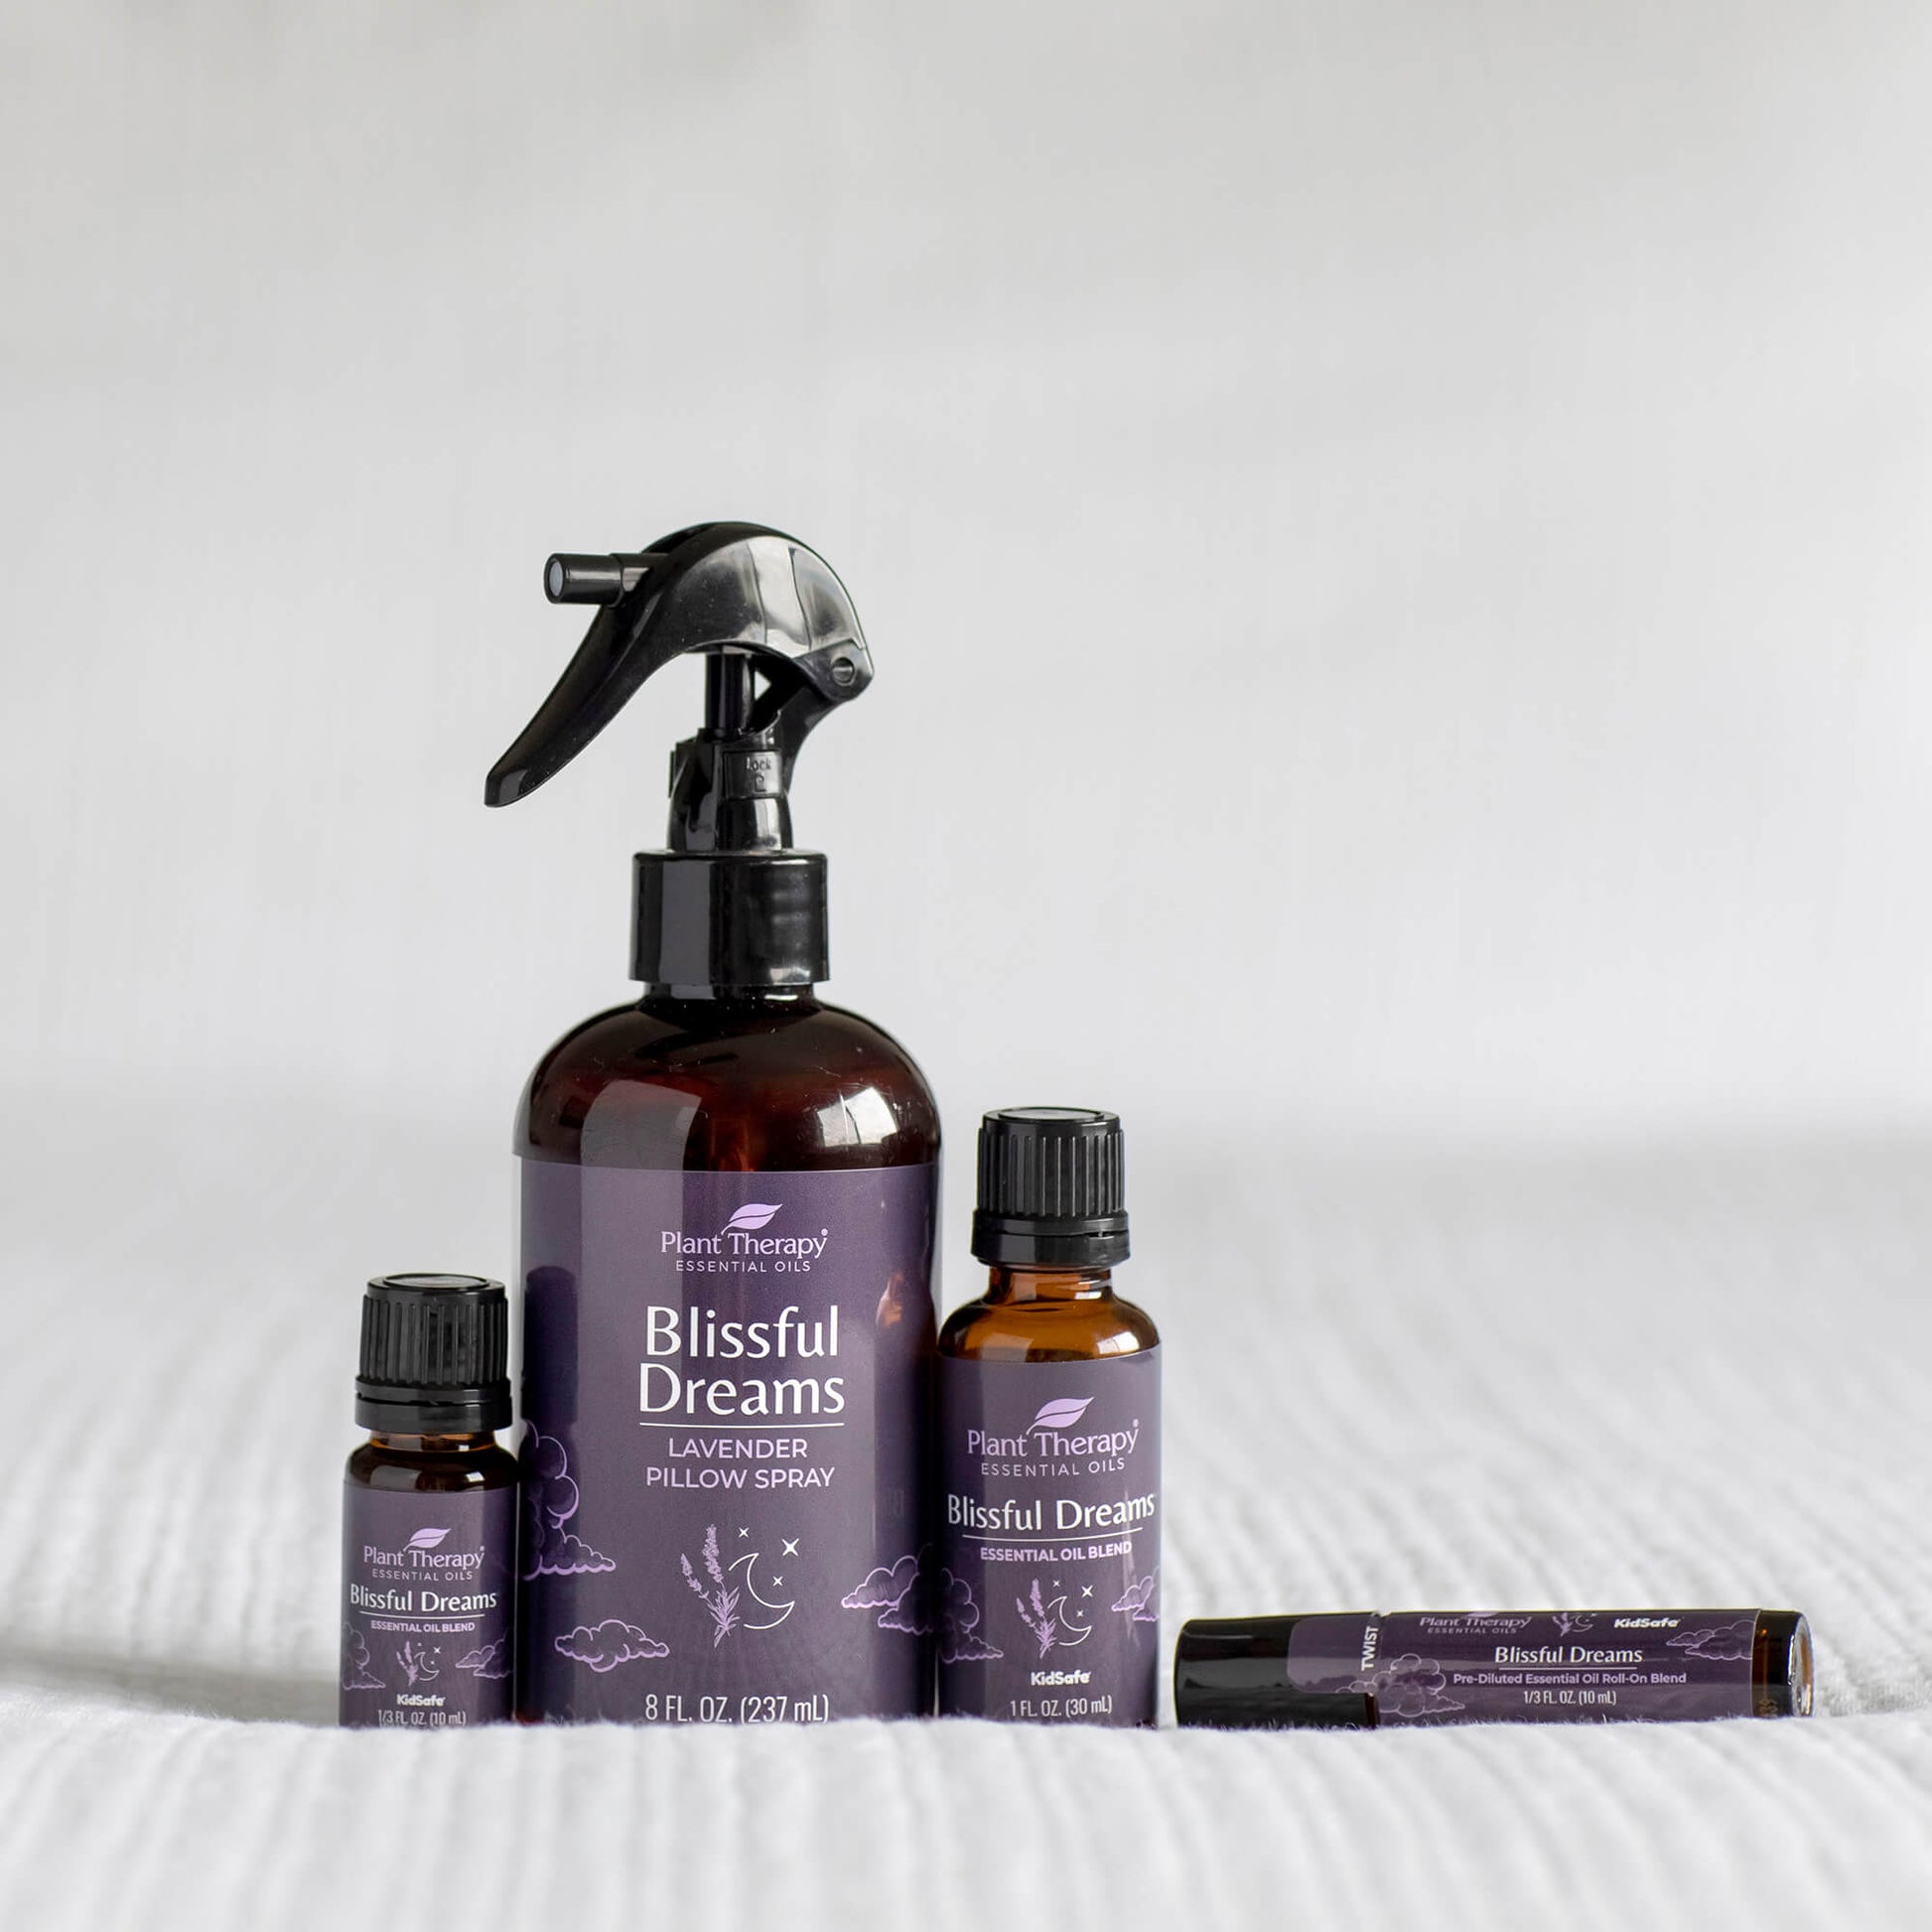 Is Lavender Essential Oil Spray Safe to Use?